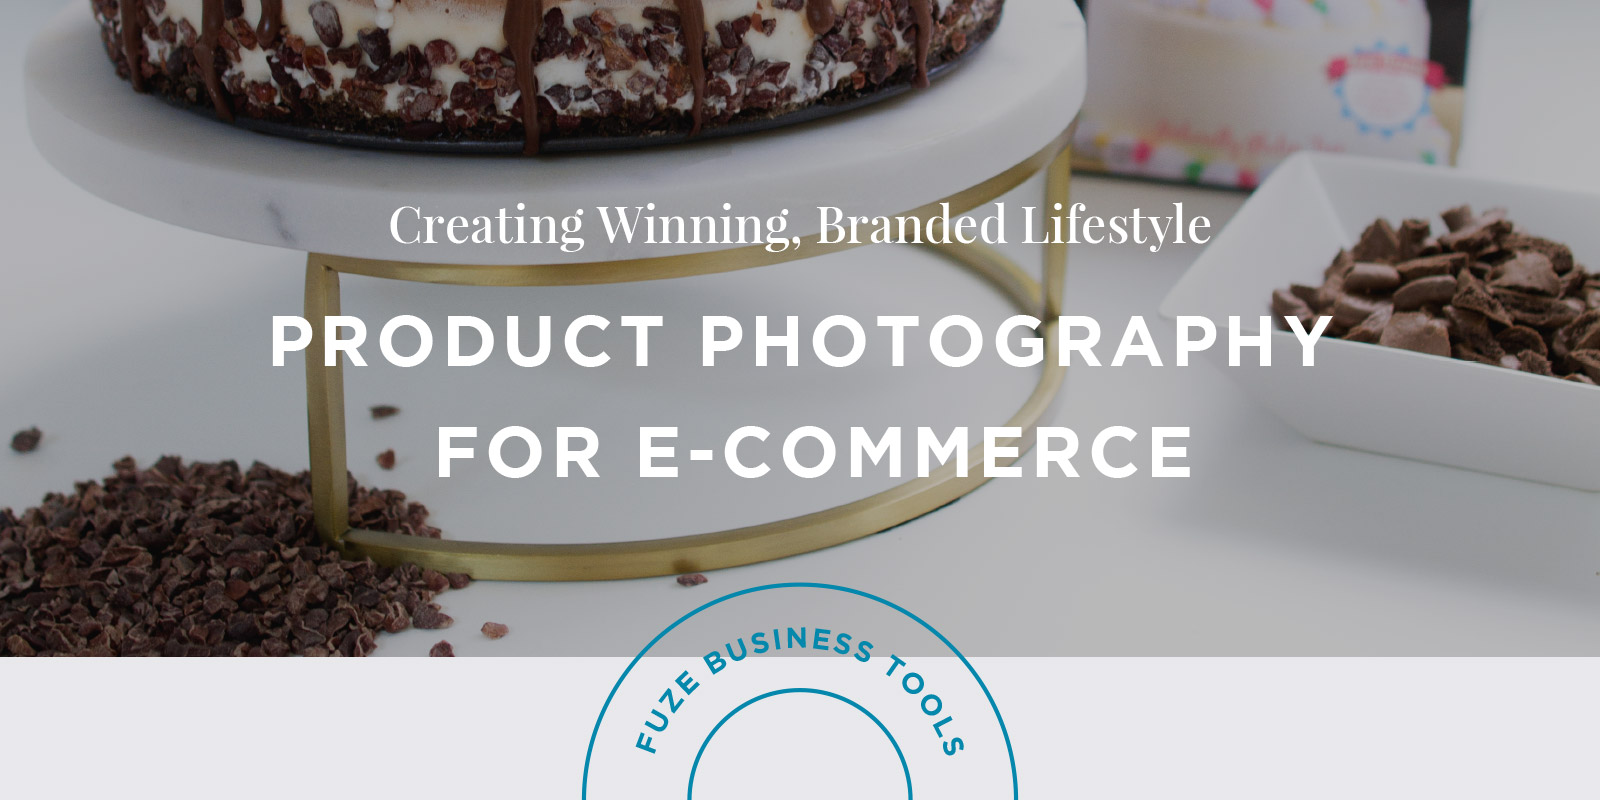 Lifestyle Photography tips for small business owners